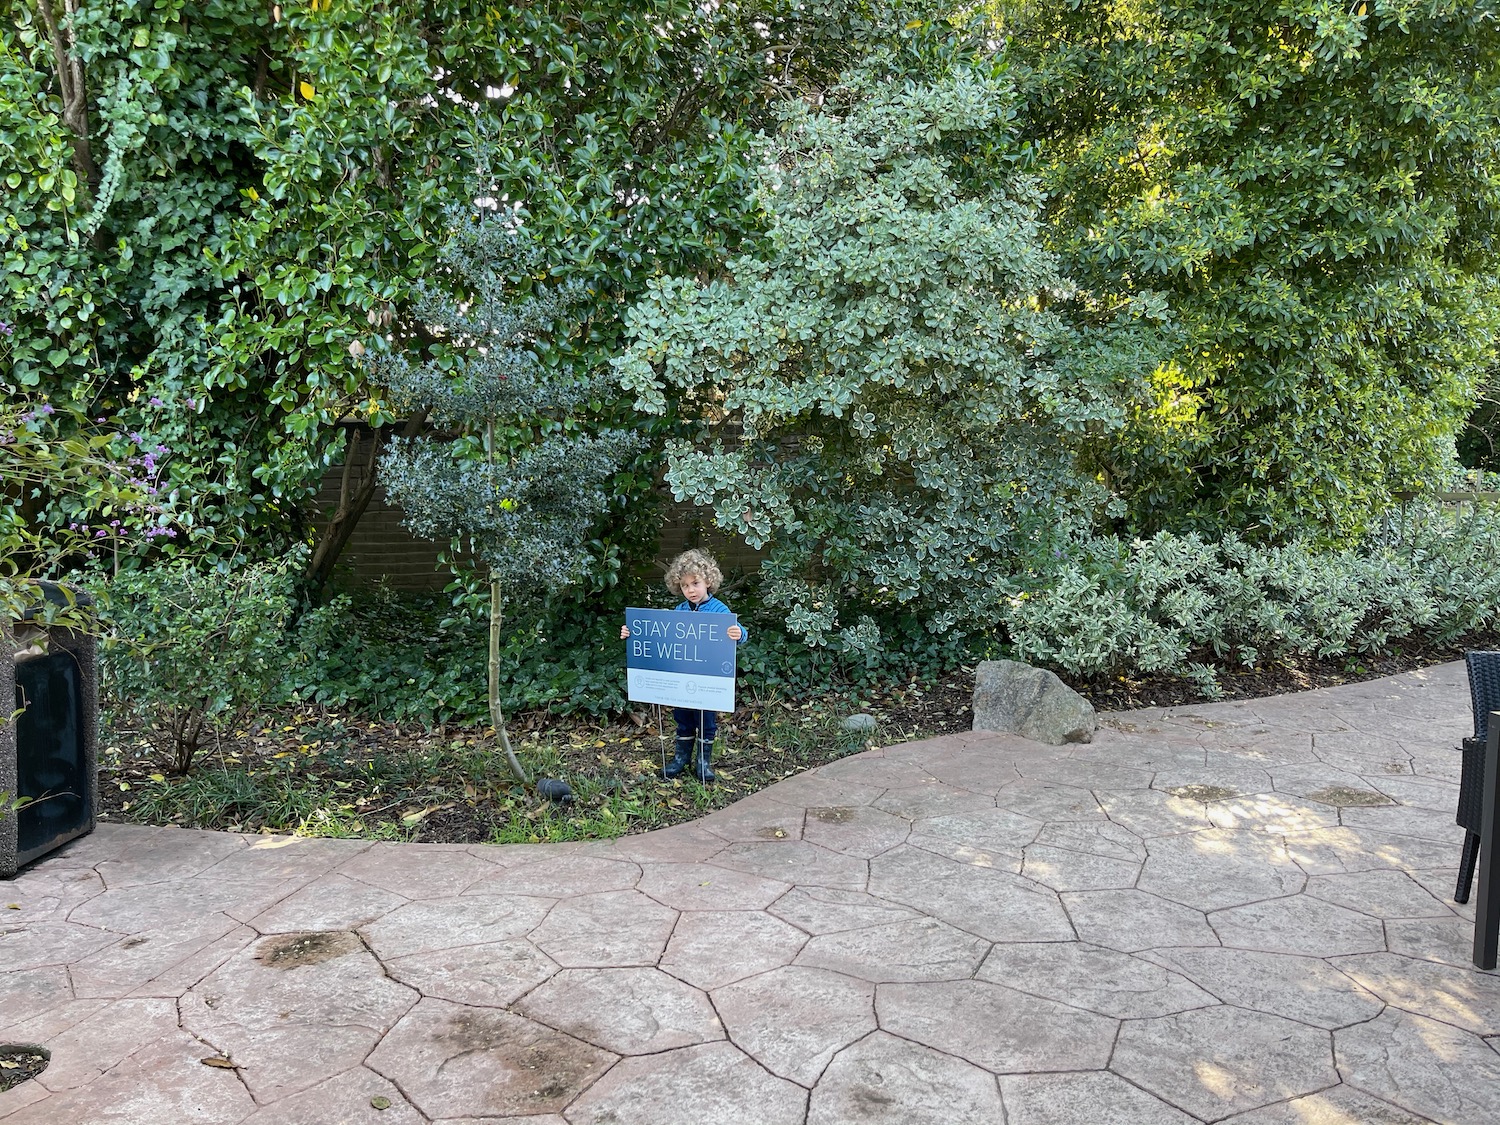 a child standing in a garden with a sign